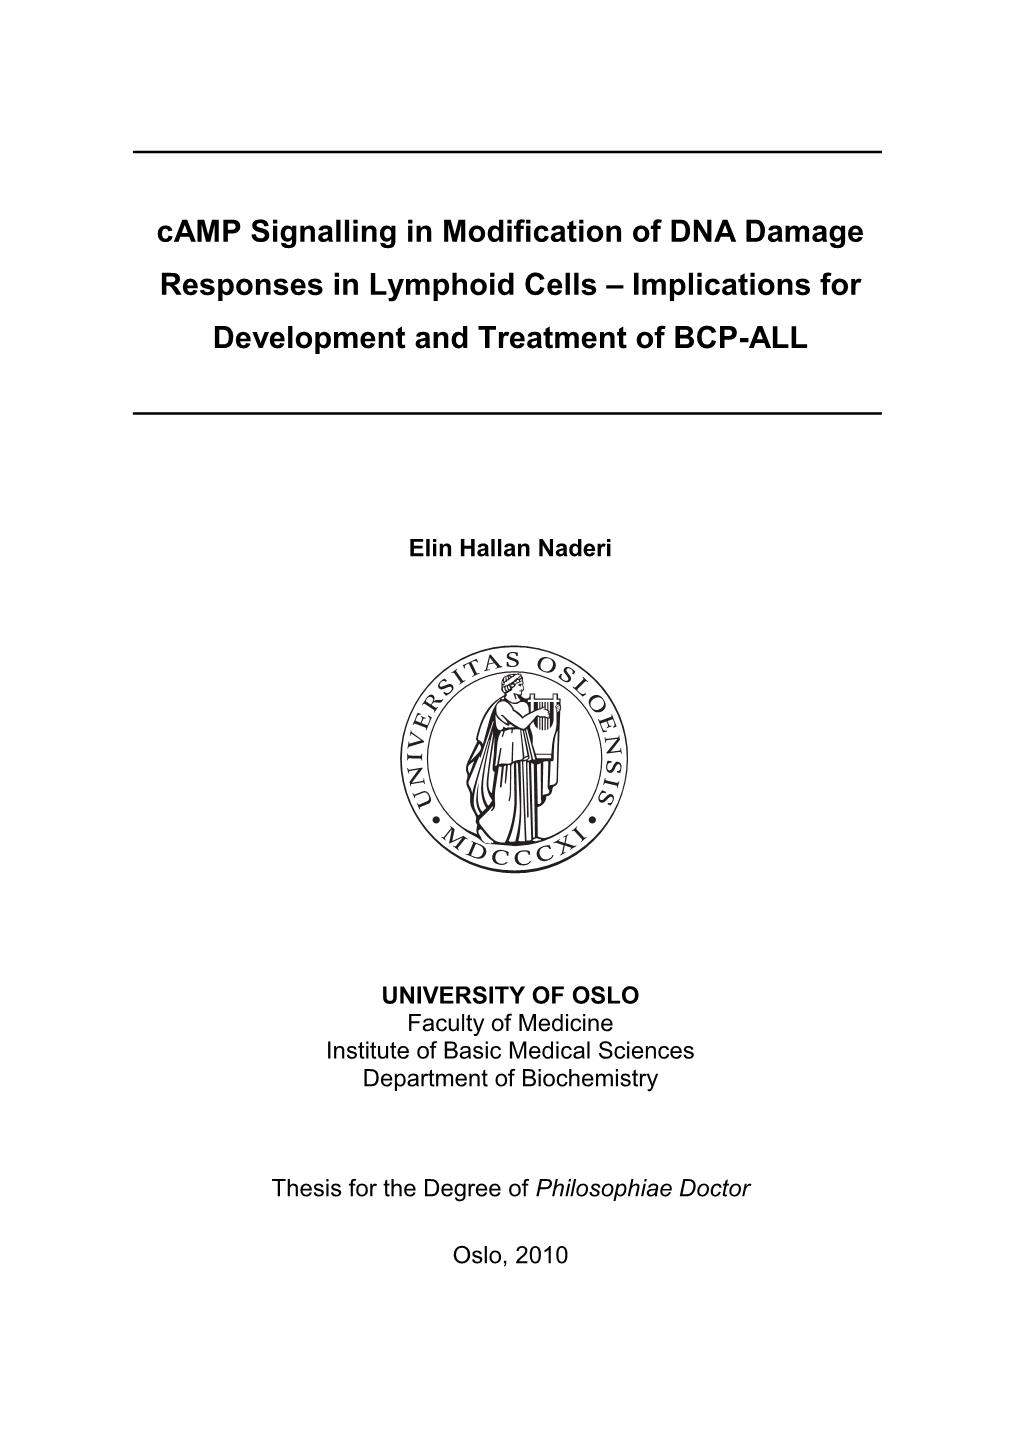 Camp Signalling in Modification of DNA Damage Responses in Lymphoid Cells – Implications for Development and Treatment of BCP-ALL